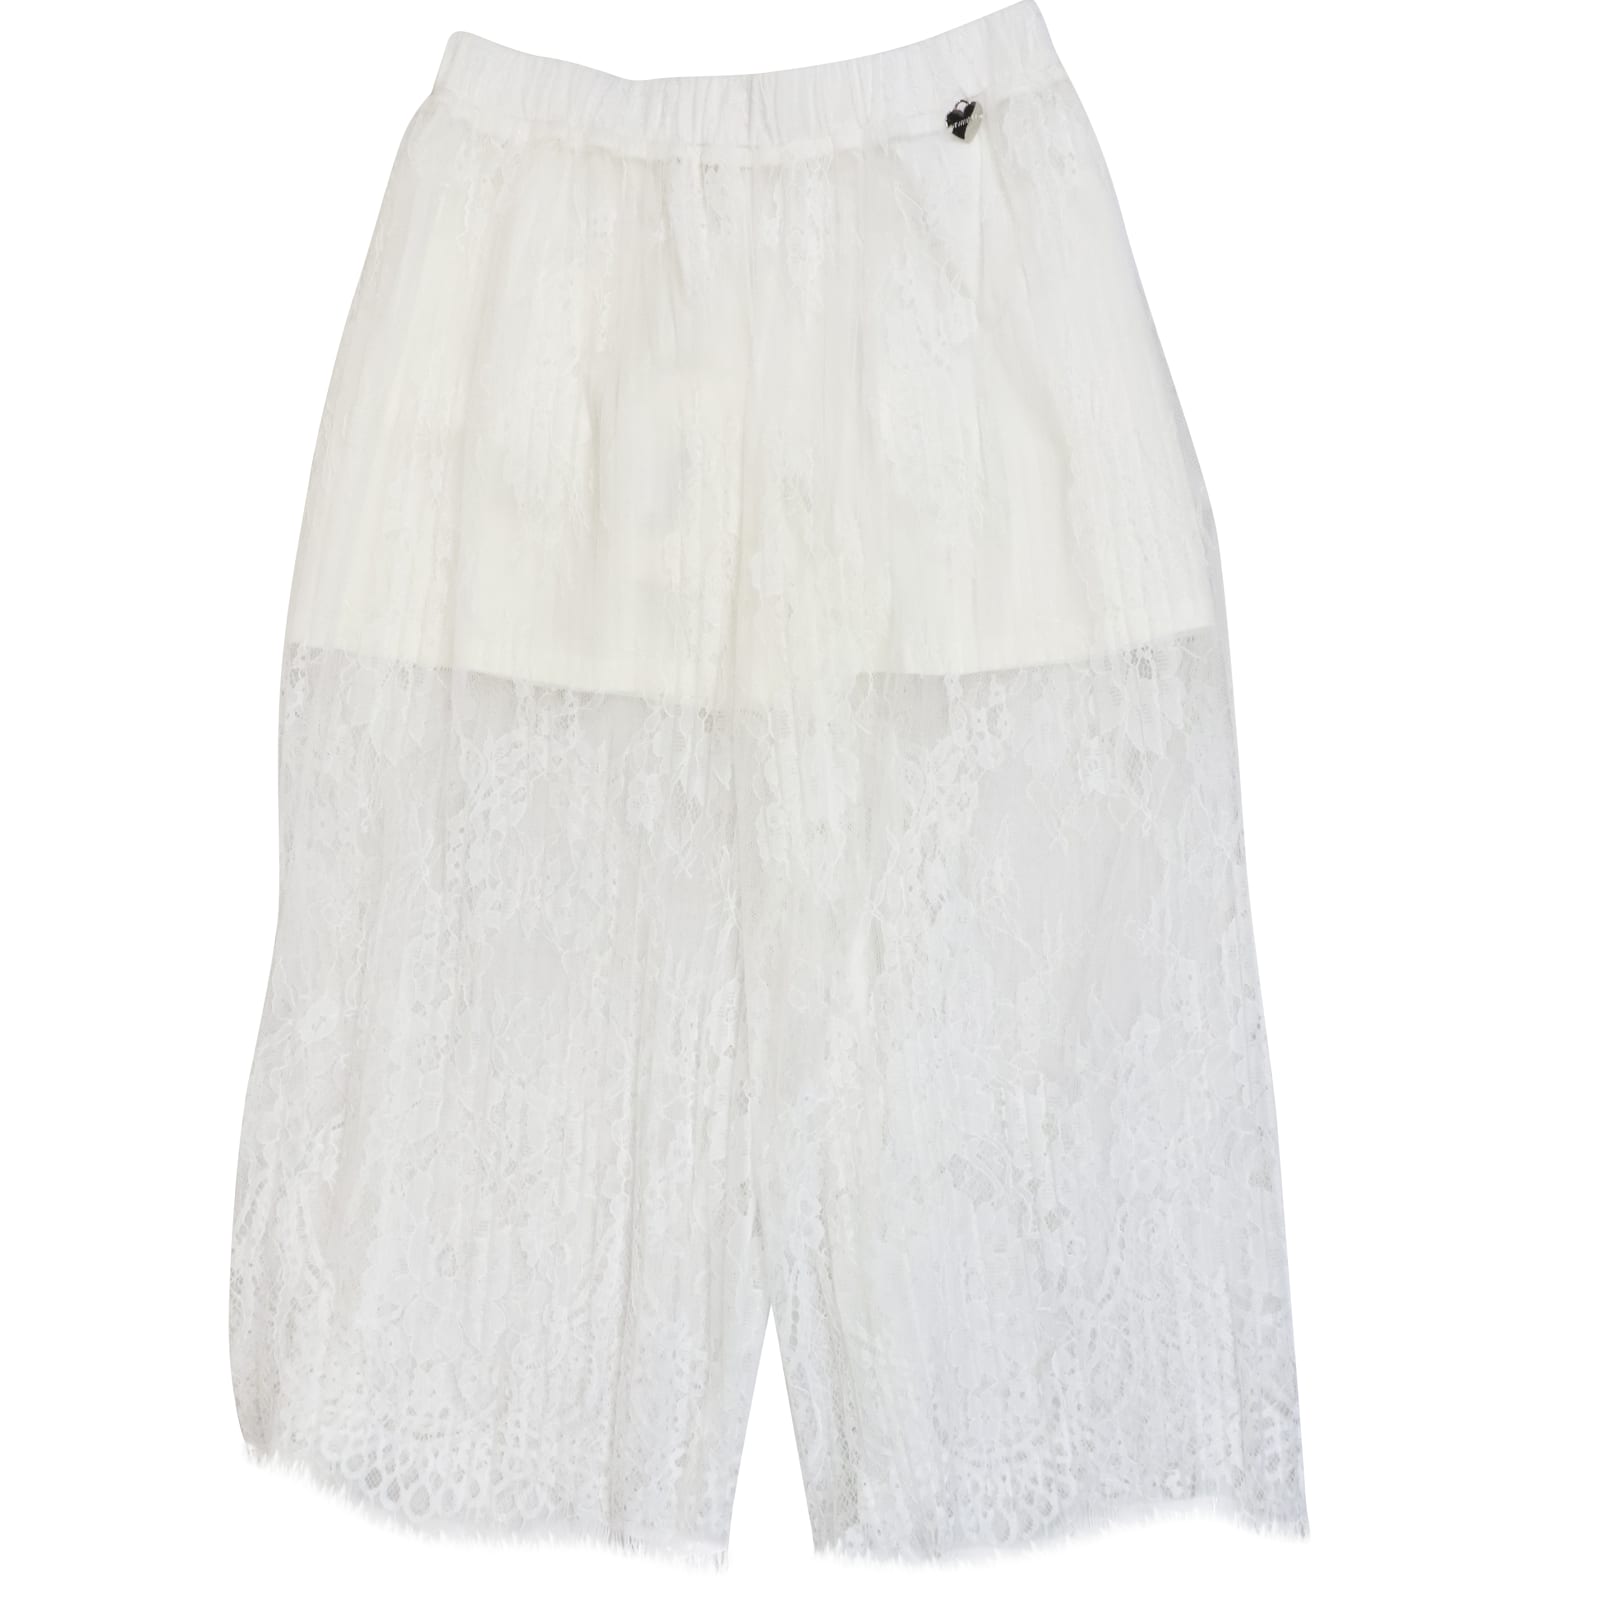 Twinset Kids' Poliammide Trousers